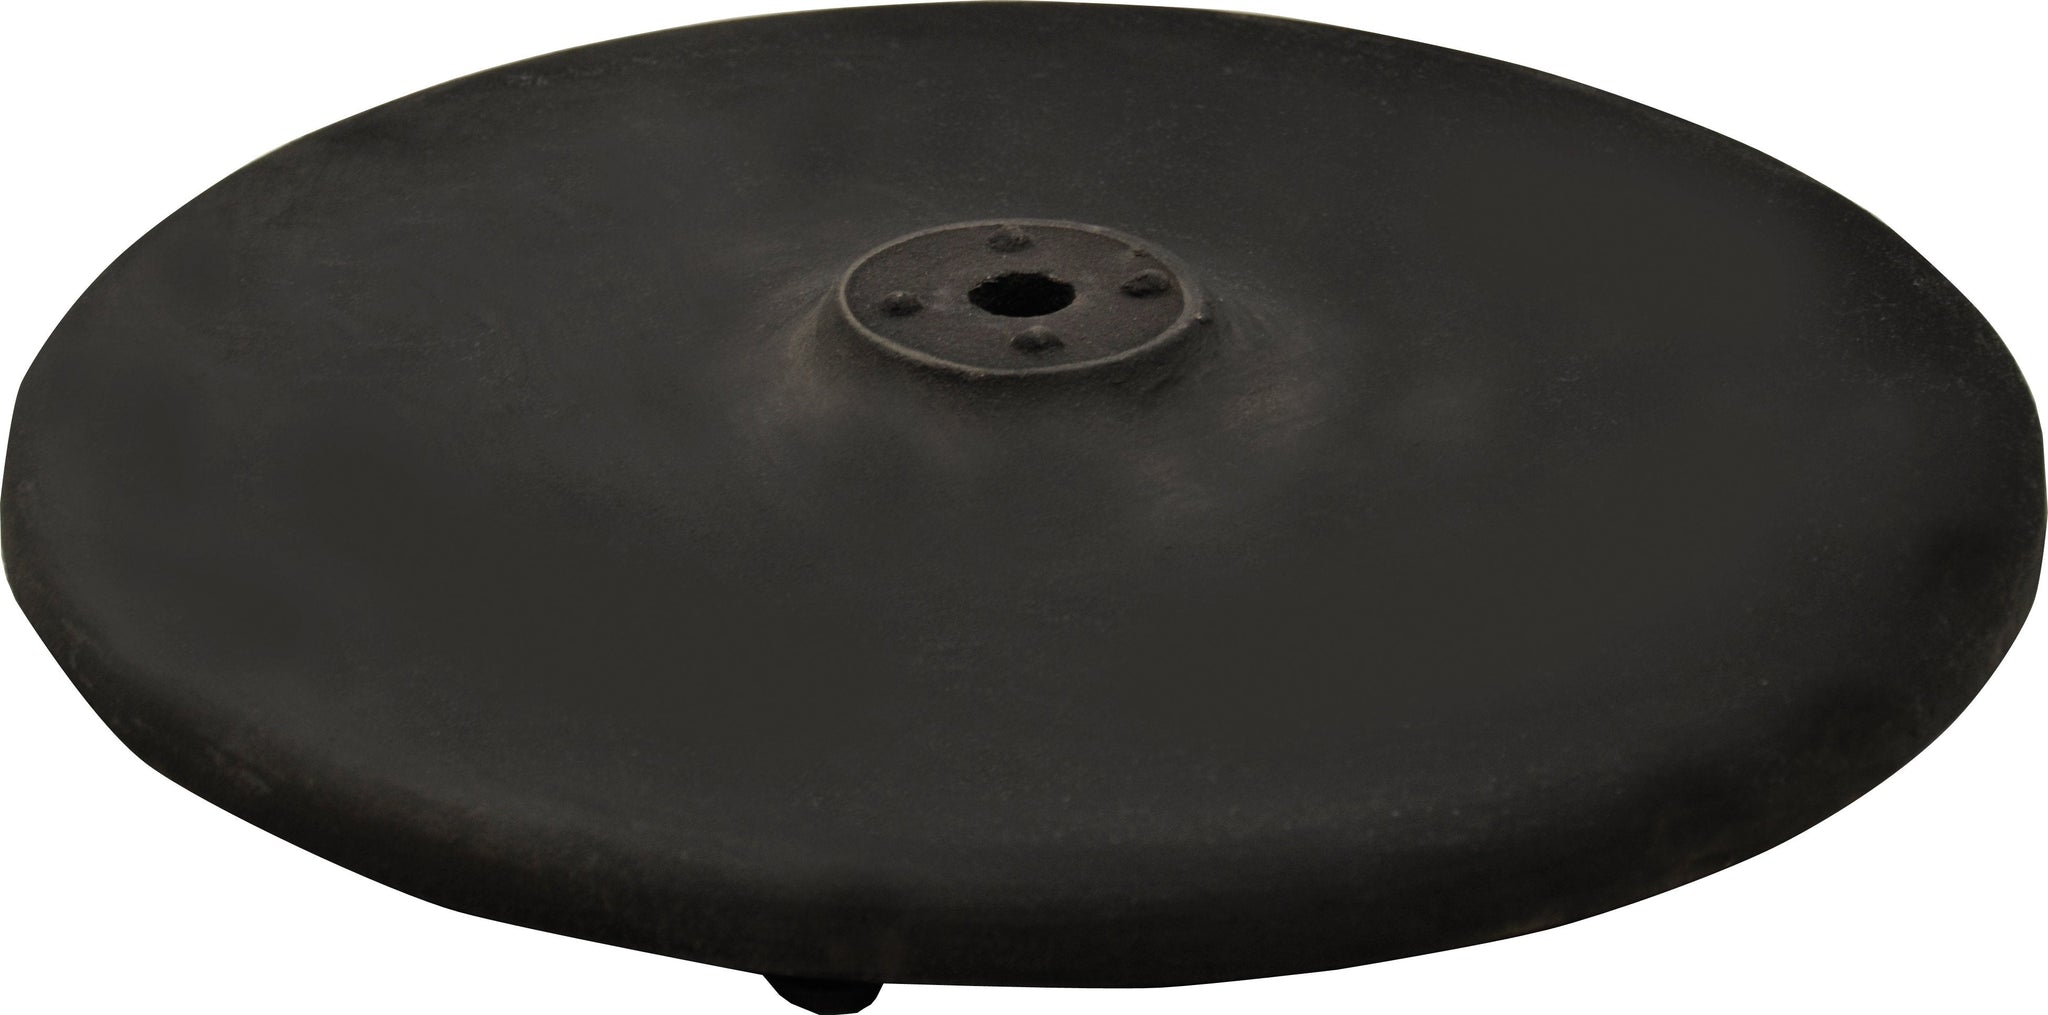 Omcan - 22" Round Table Base - 43157